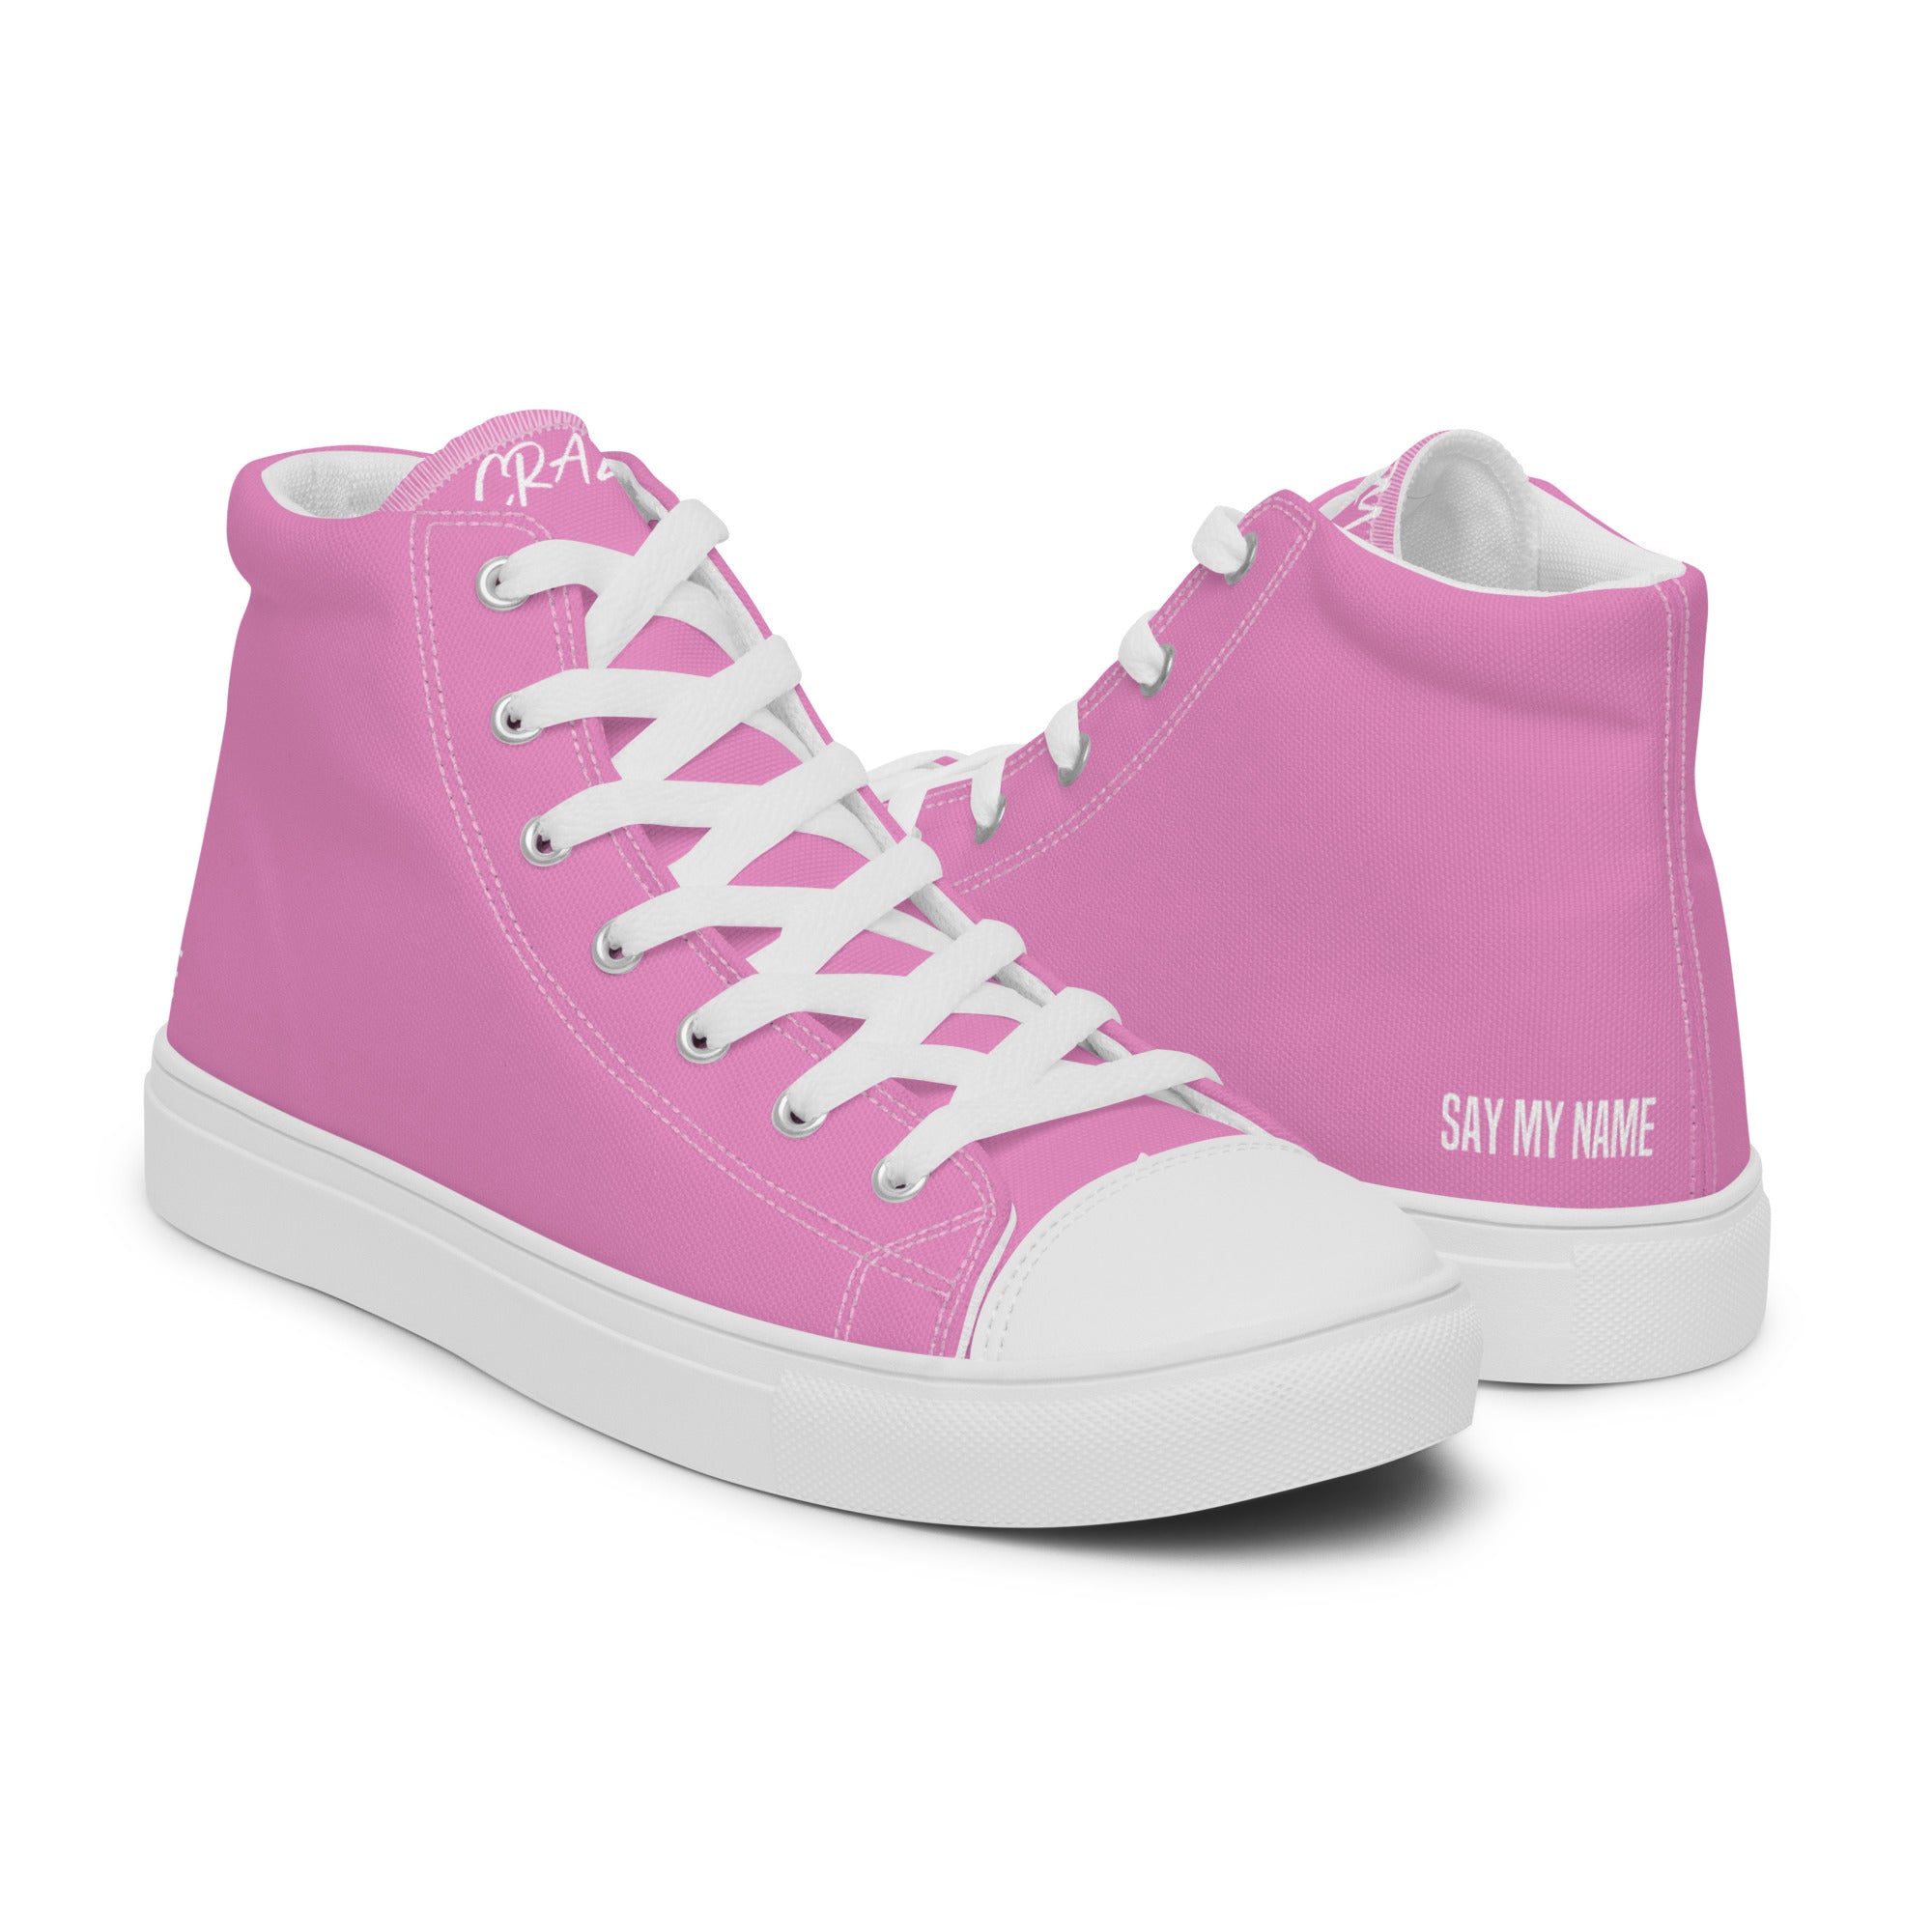 "SAY MY NAME" hoge roze canvas damessneakers